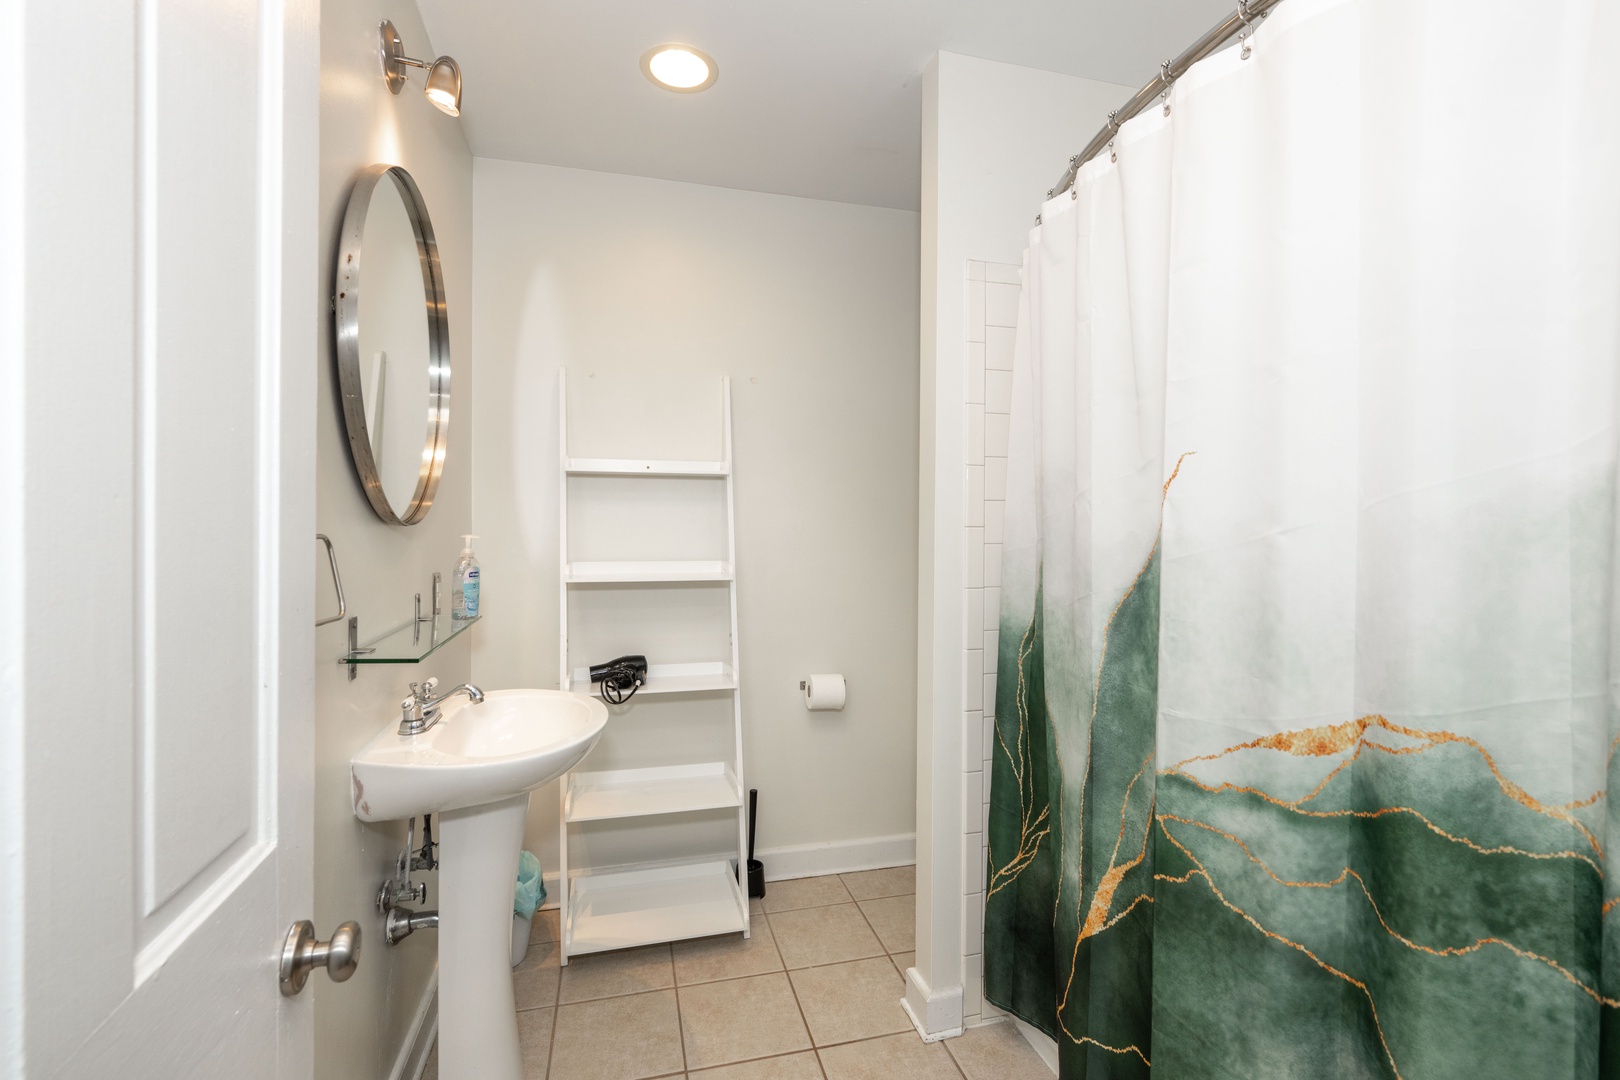 The upper-level full bath includes a pedestal sink & shower/tub combo